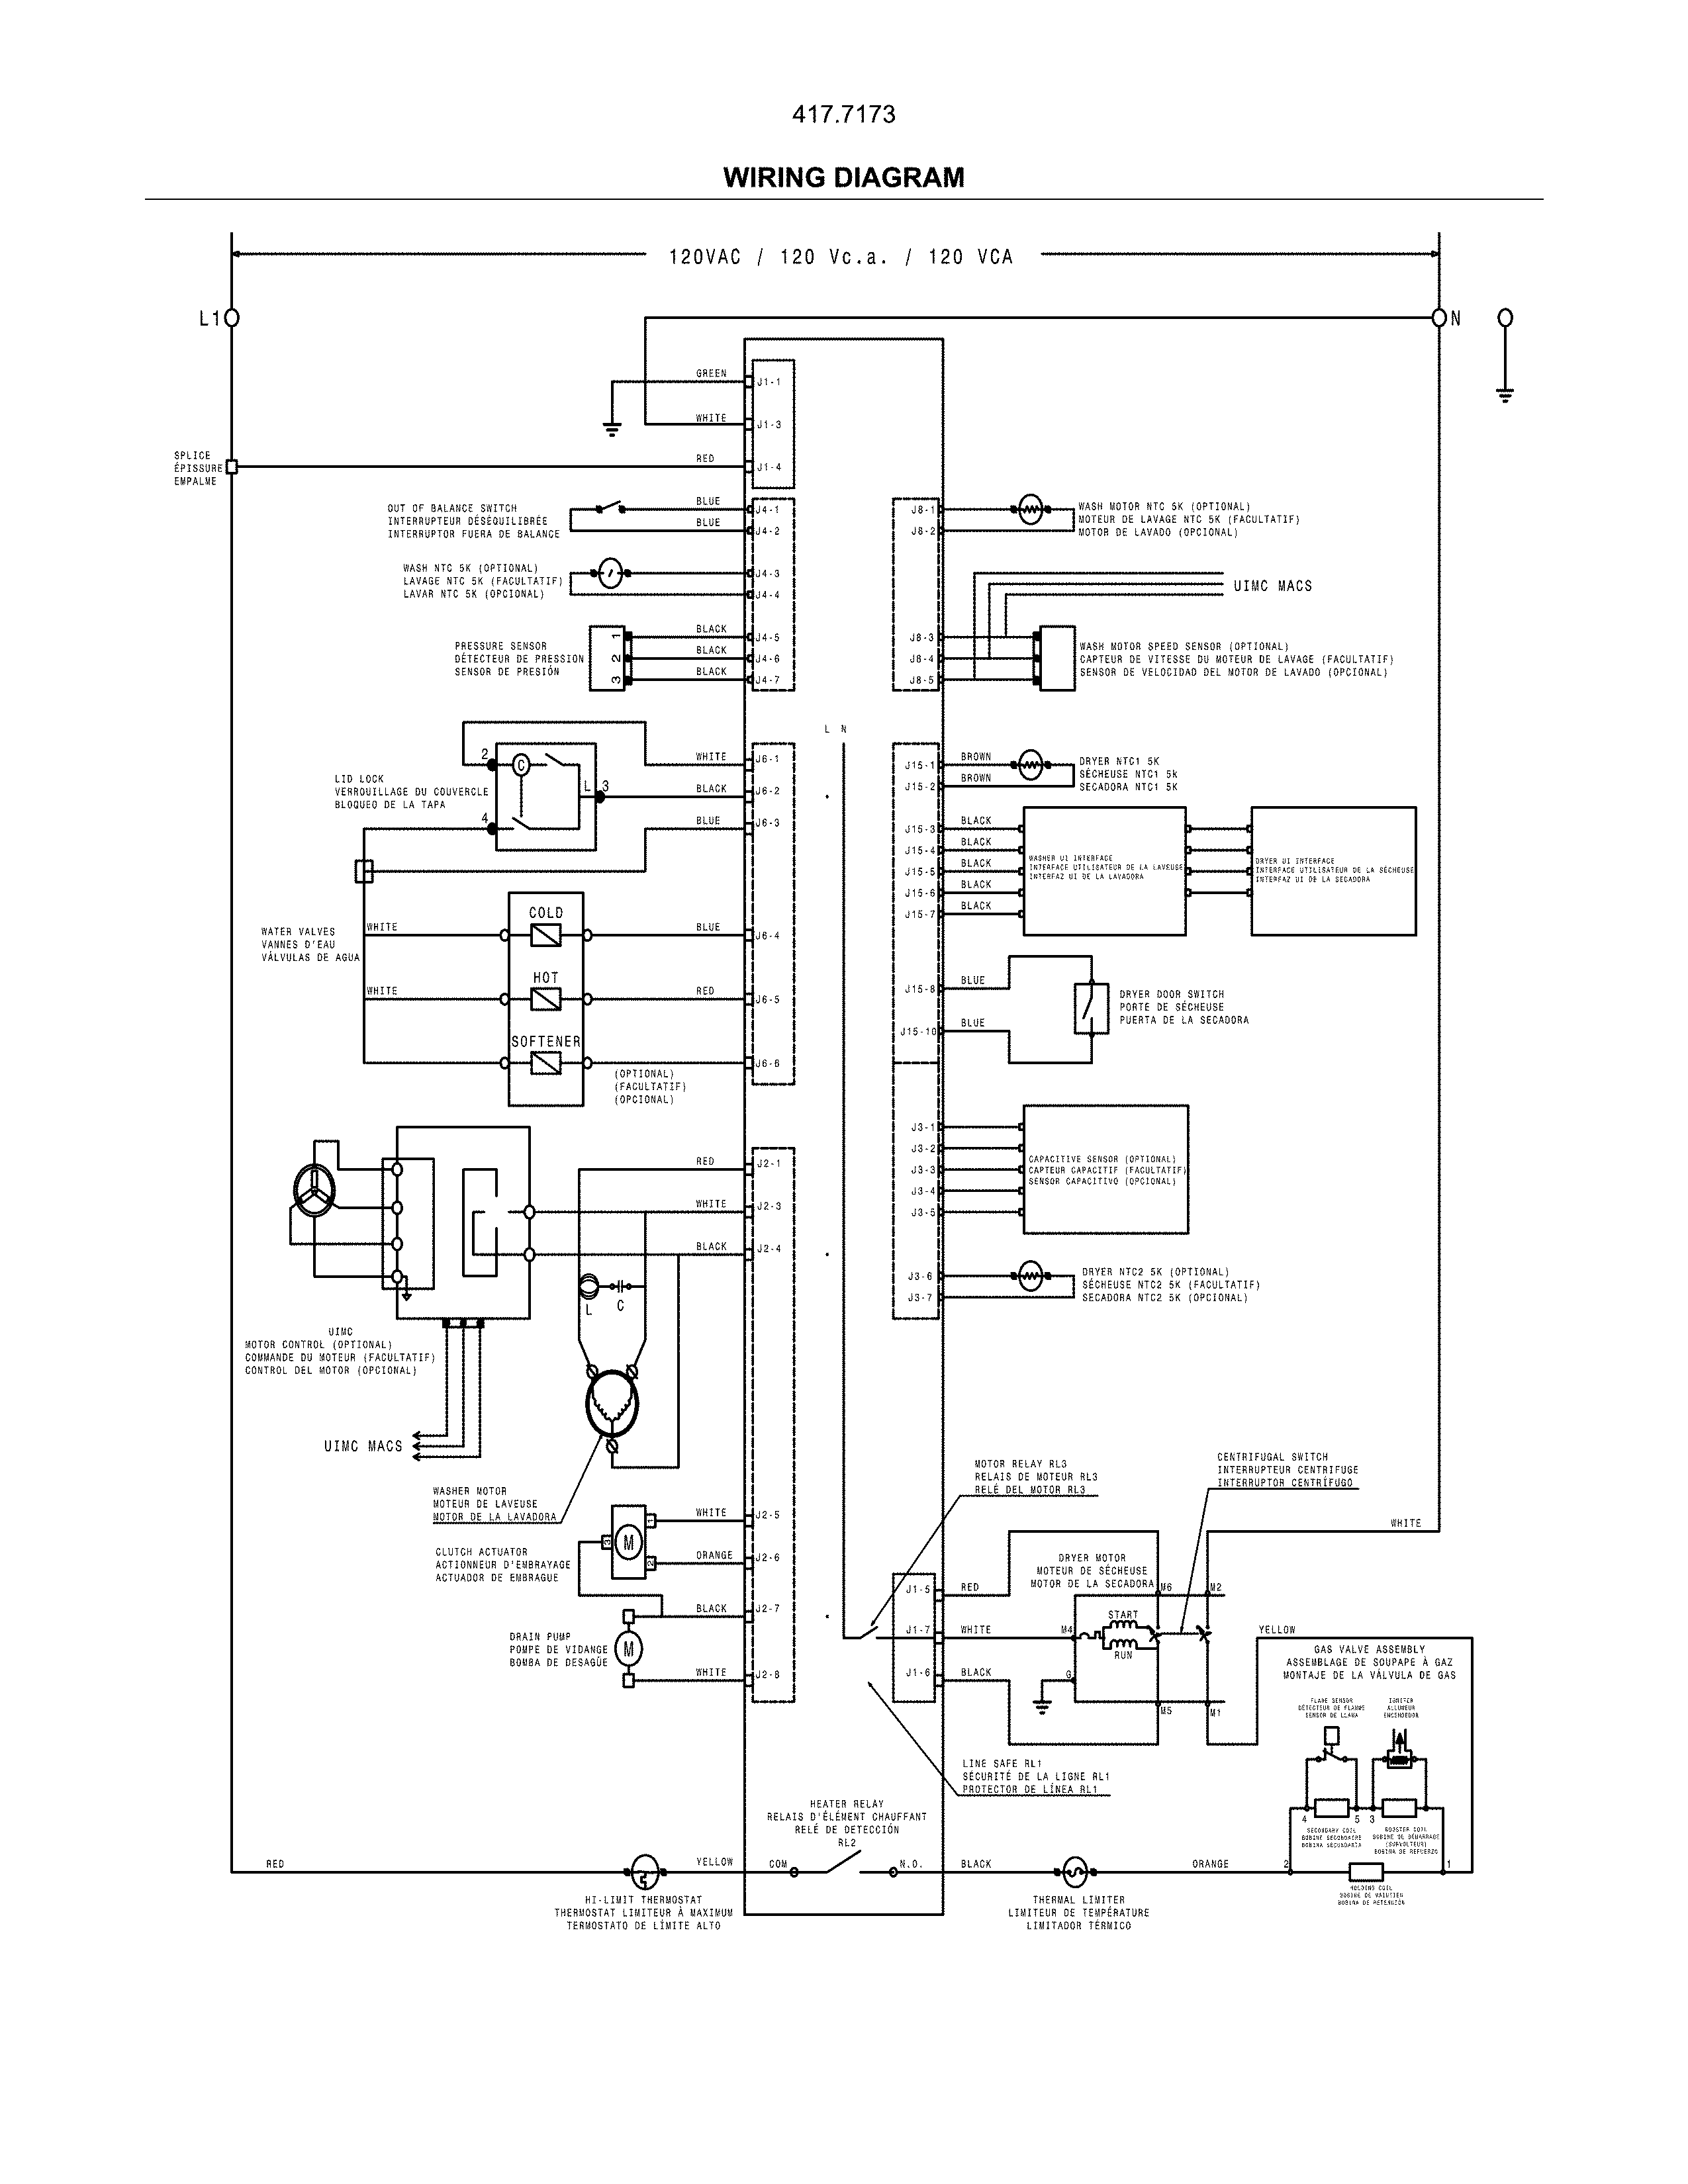 Kenmore  Laundry Center  Wiring diagram